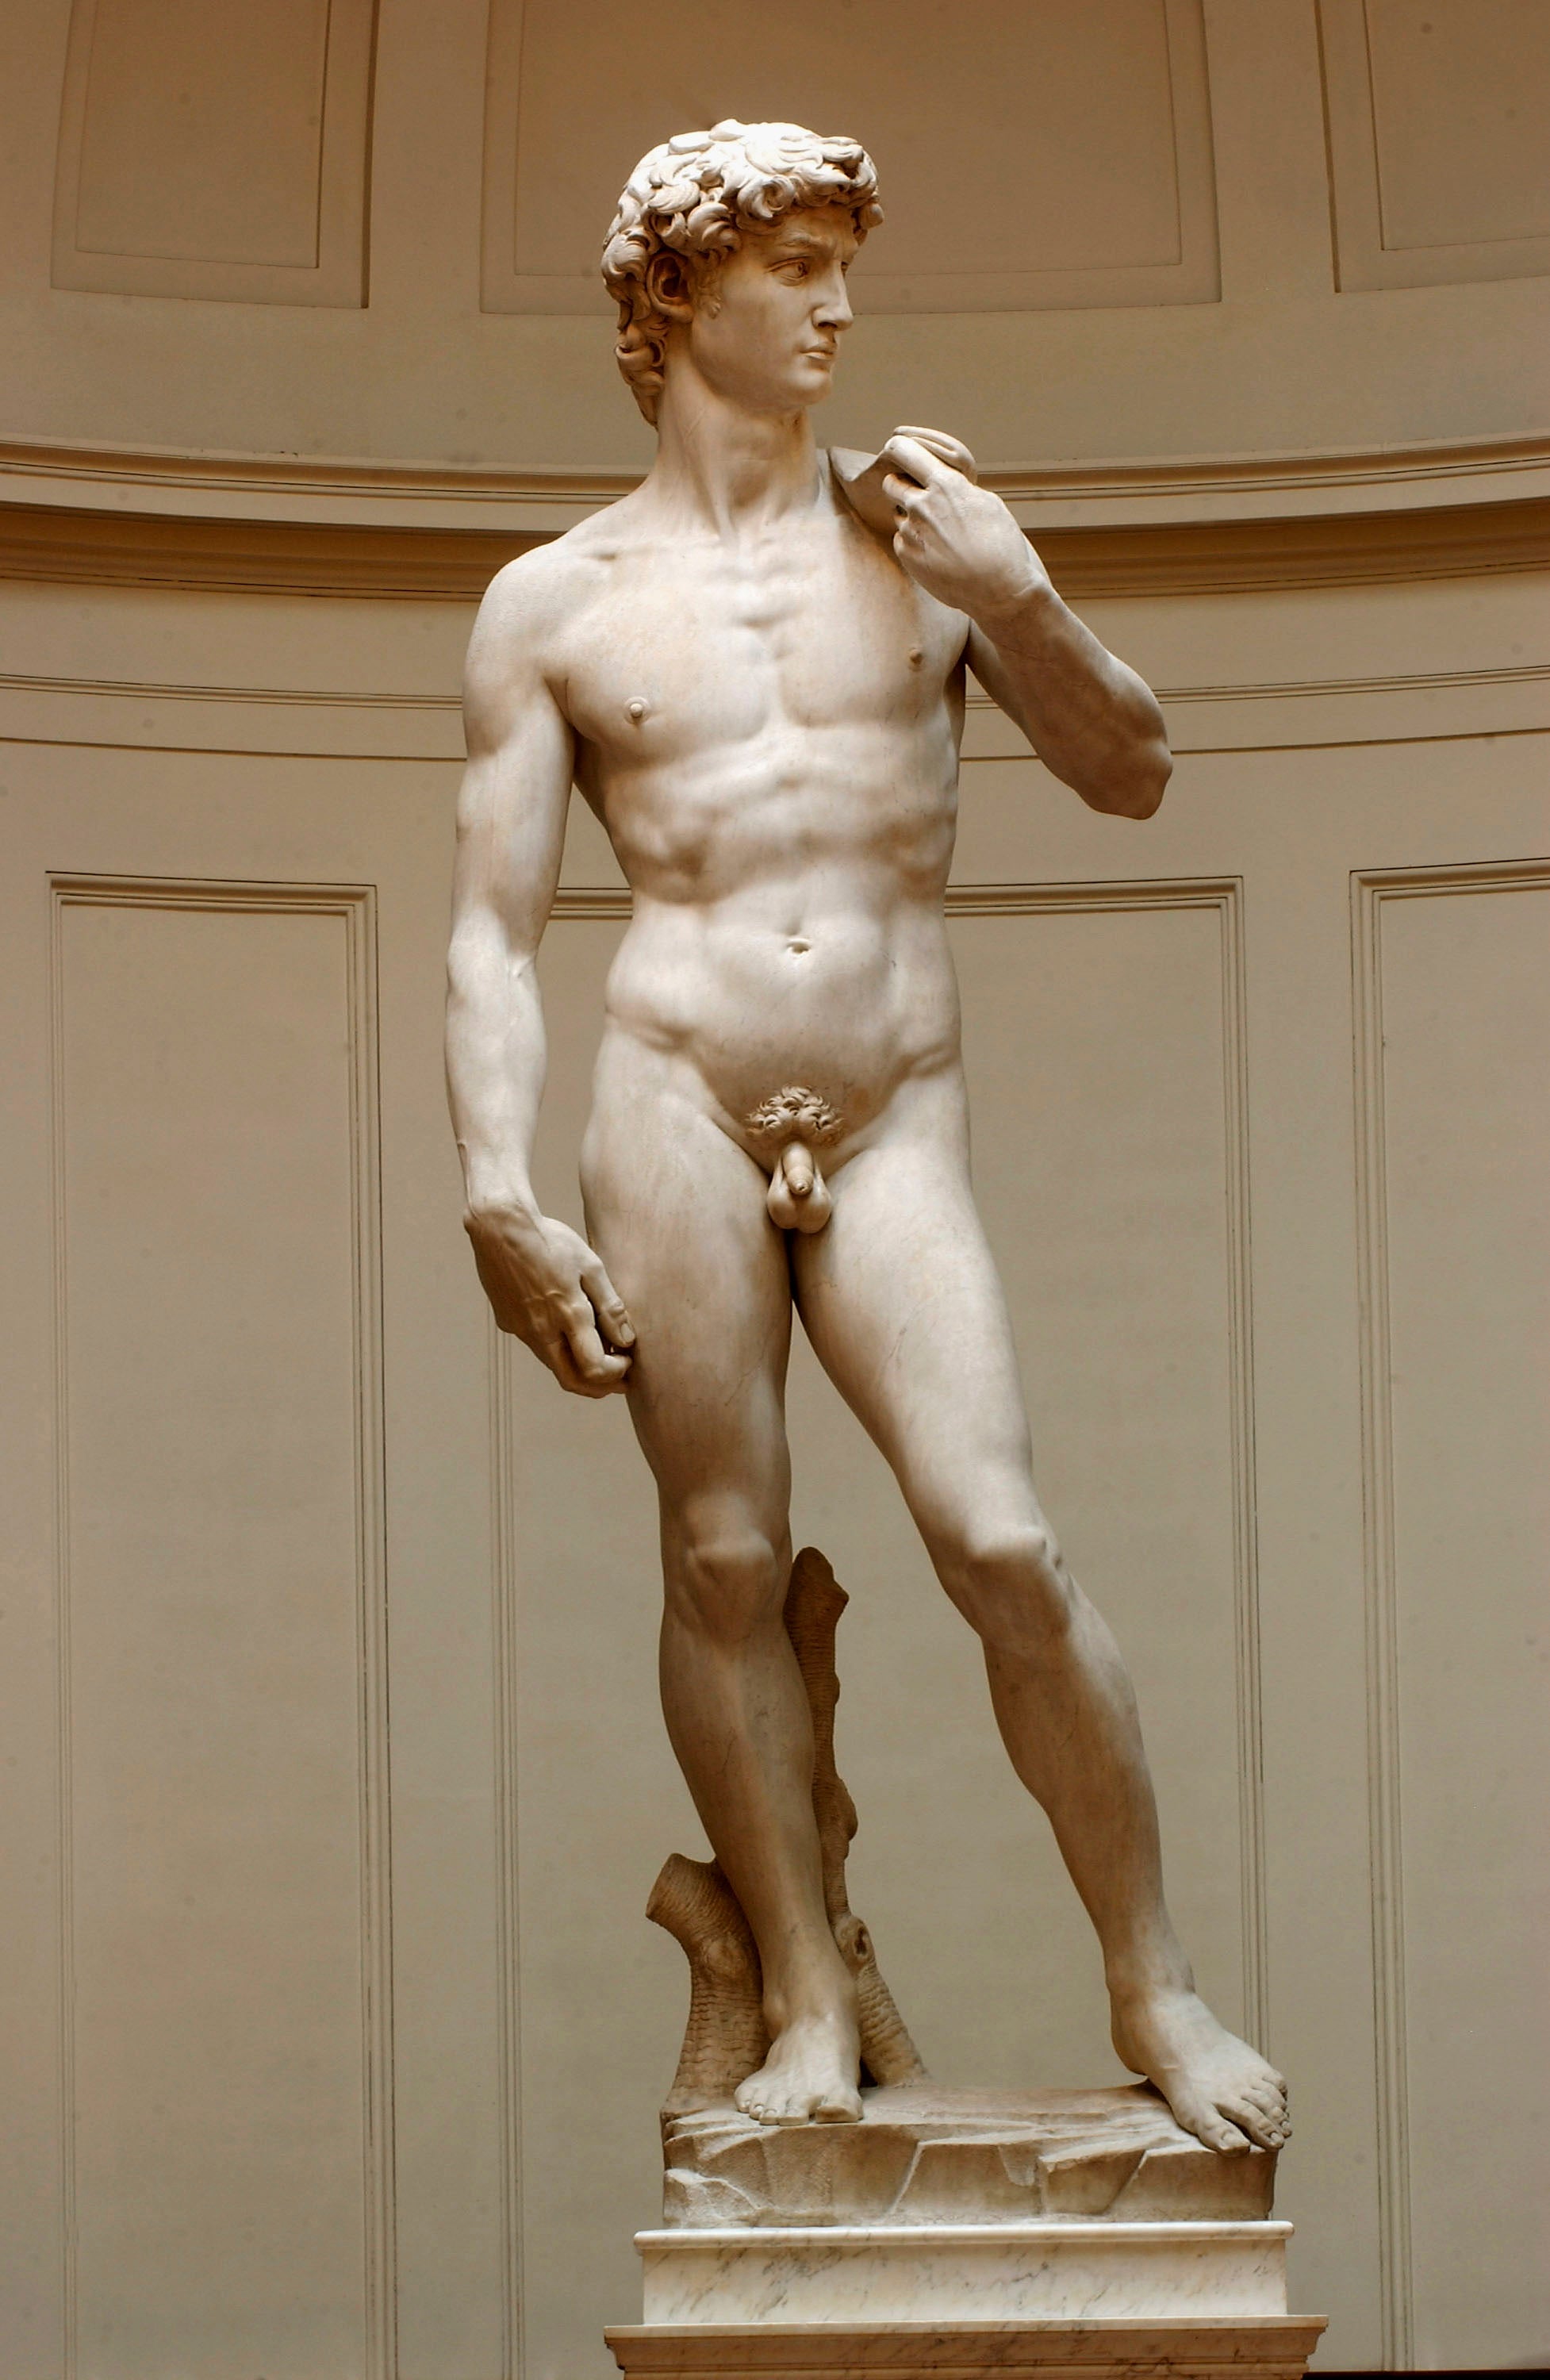 Michelangelo’s statue of David is, of course, widely considered a masterpiece of the Renaissance